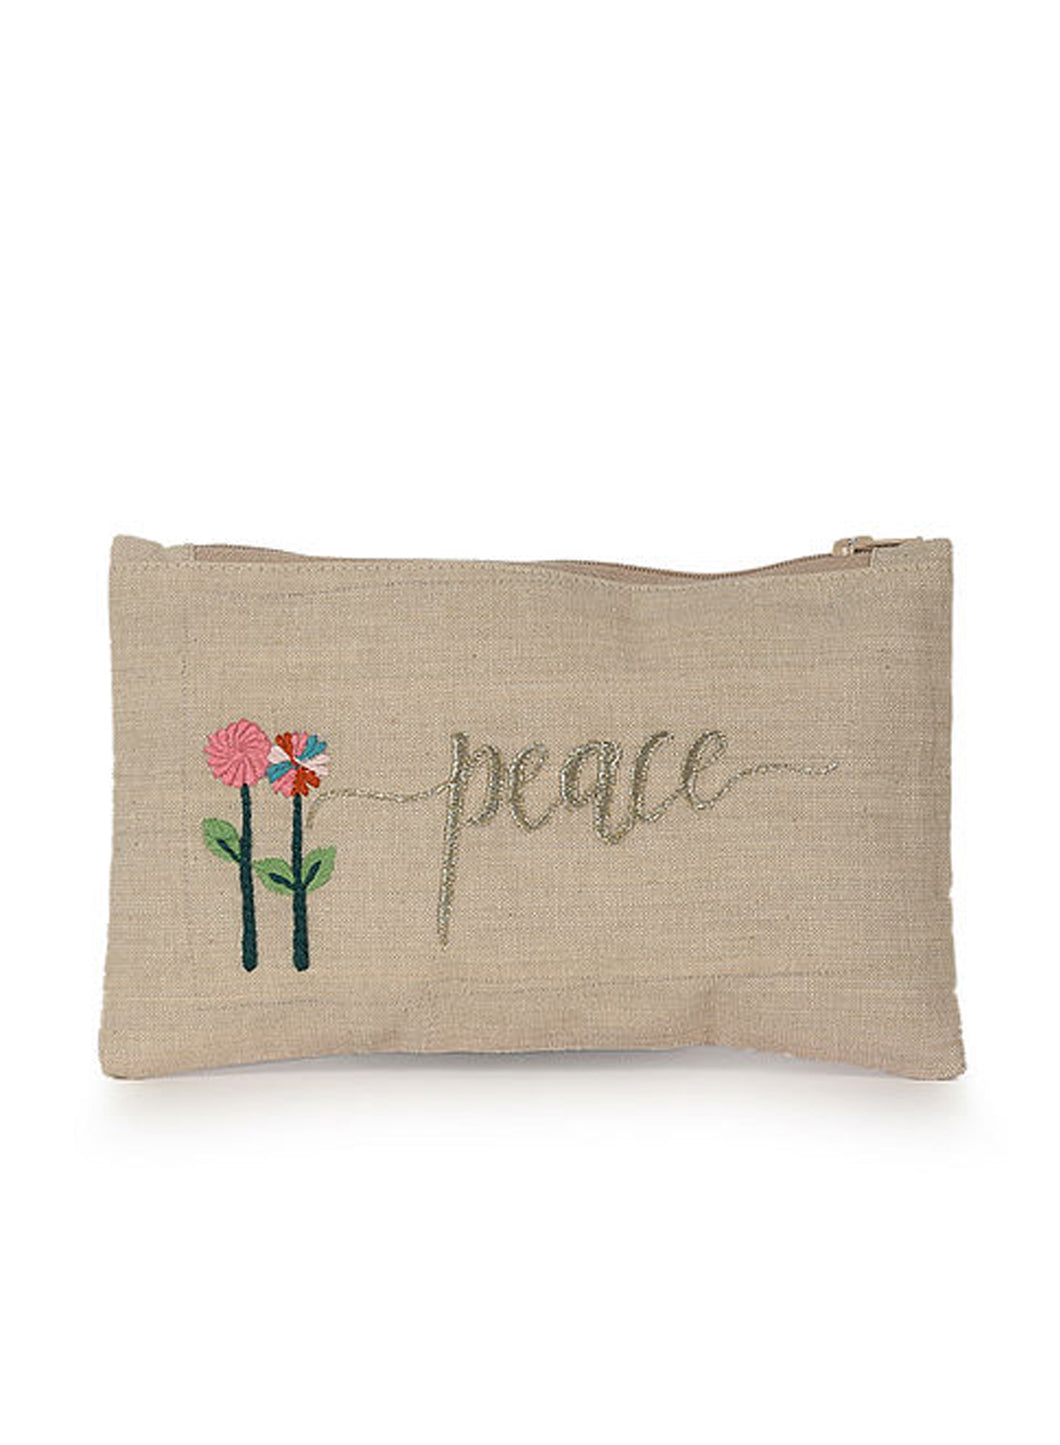 Kanyoga Cotton Pouch With ‘Peace’ Embroidered For Women